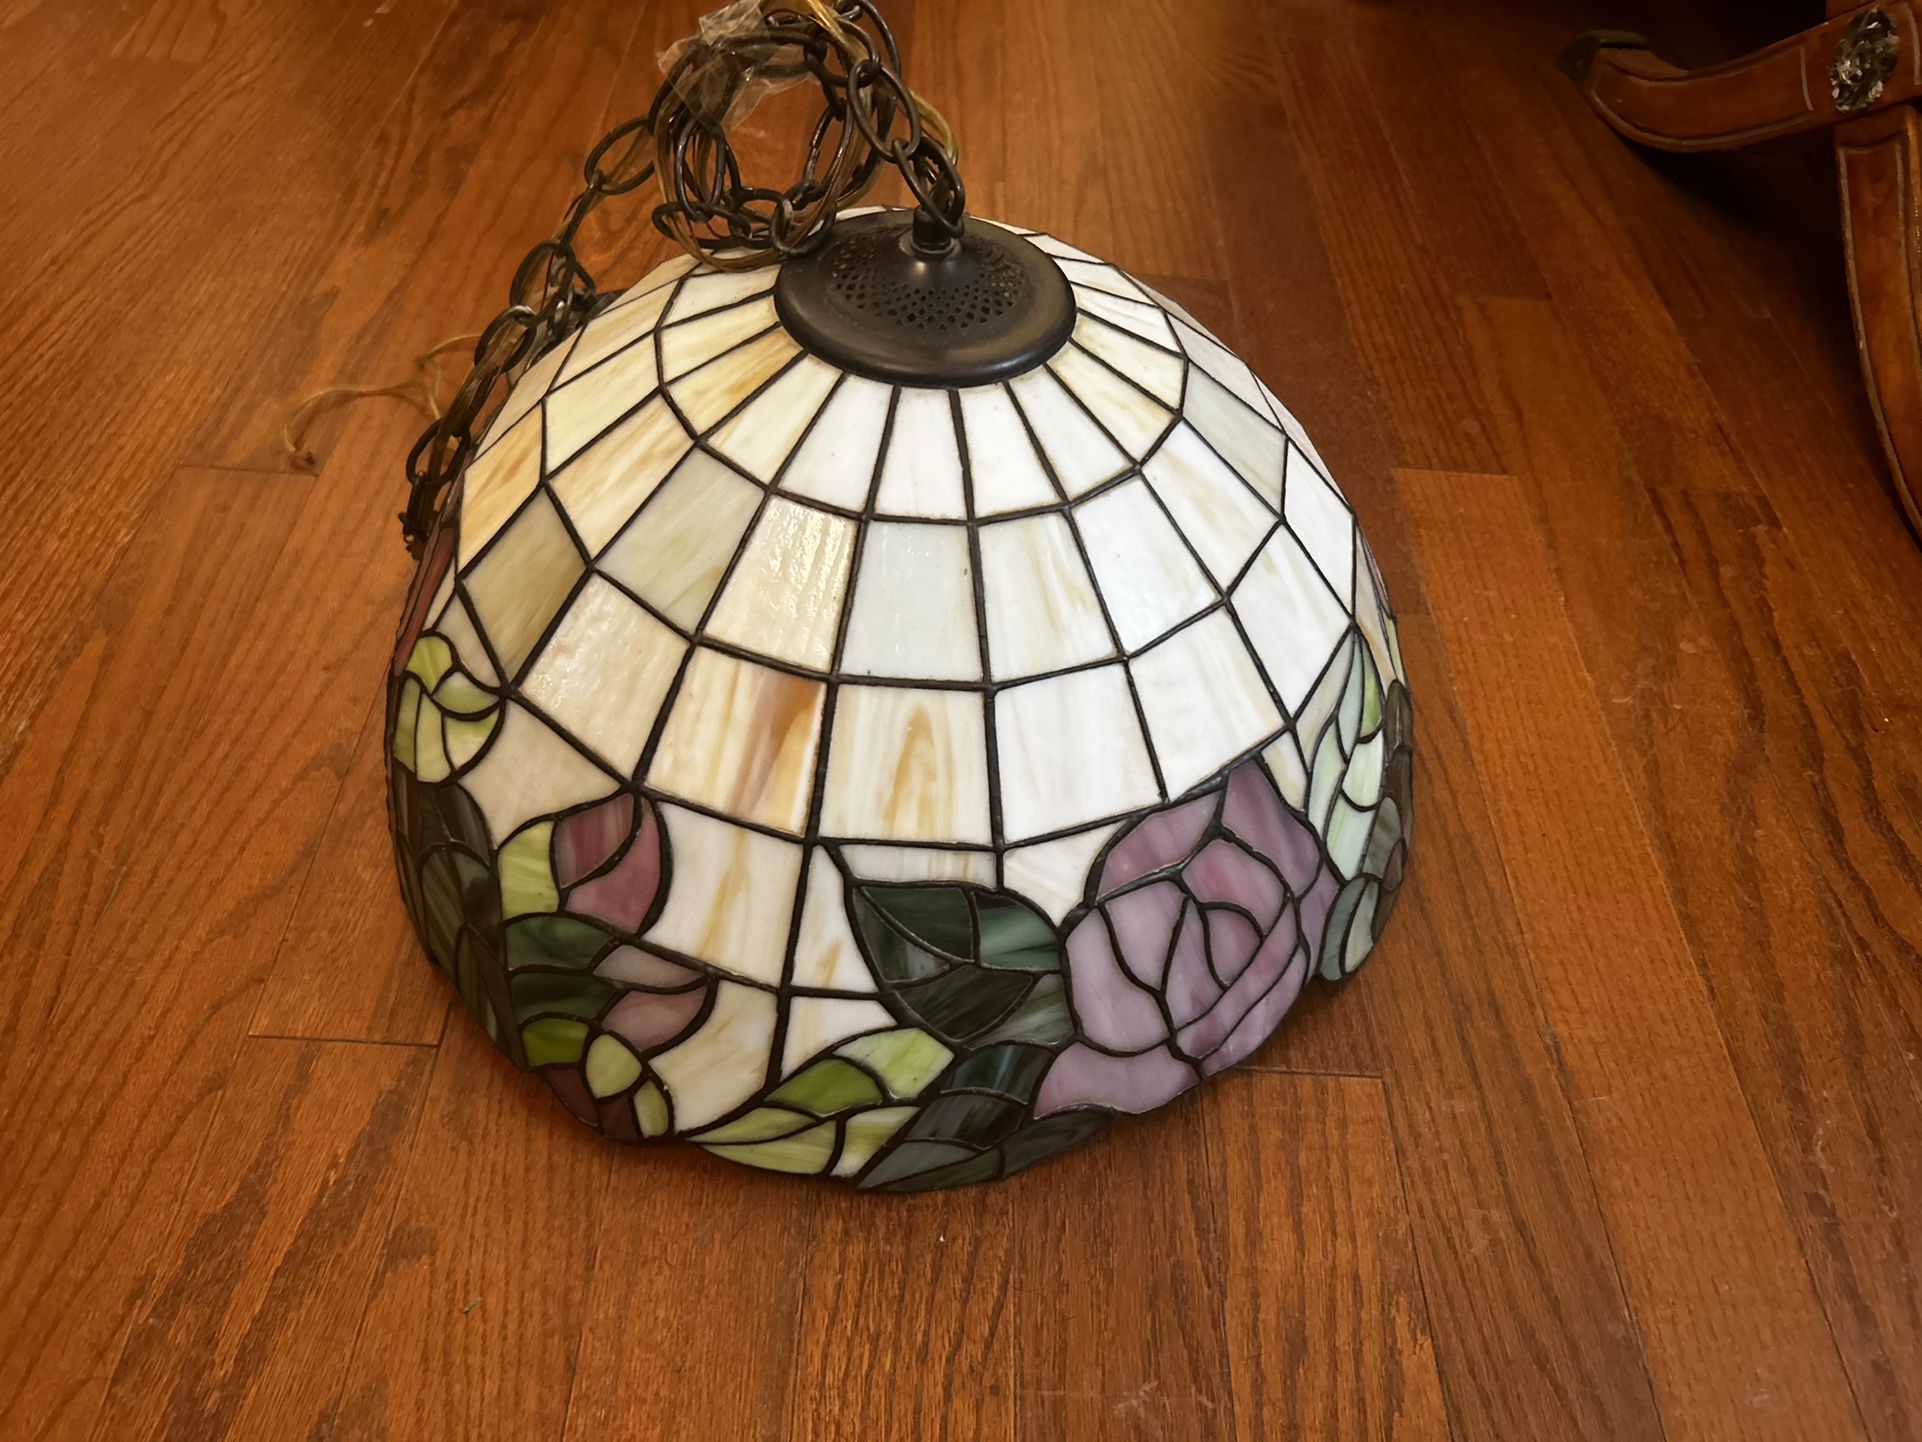 1997 Tiffany Hanging Lamps With Rose Stained Glass Like New Condition 